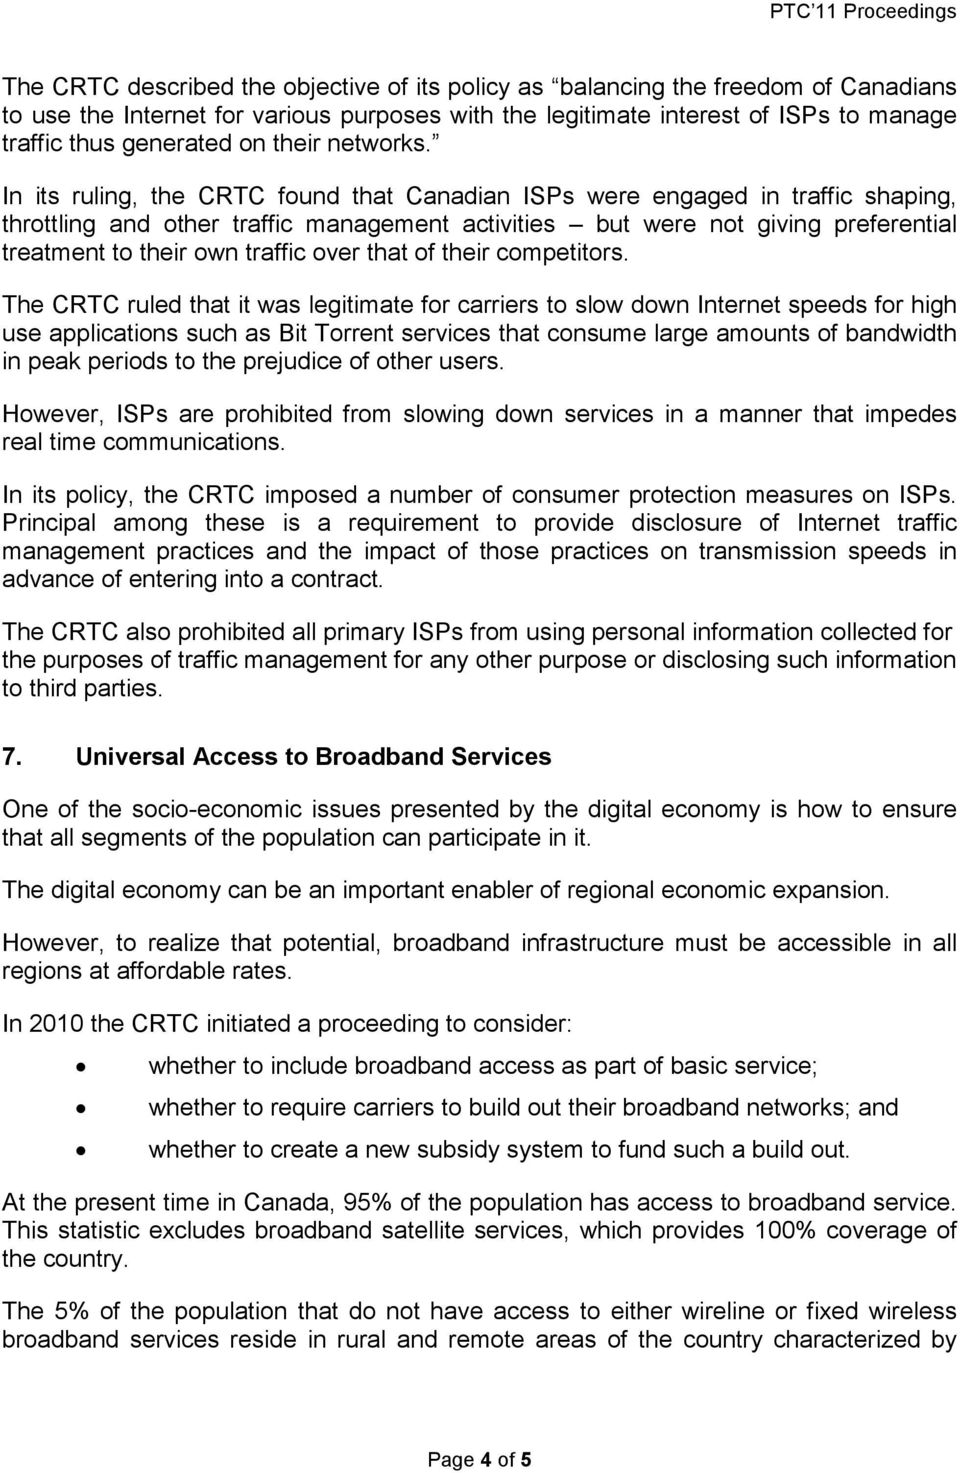 In its ruling, the CRTC found that Canadian ISPs were engaged in traffic shaping, throttling and other traffic management activities but were not giving preferential treatment to their own traffic